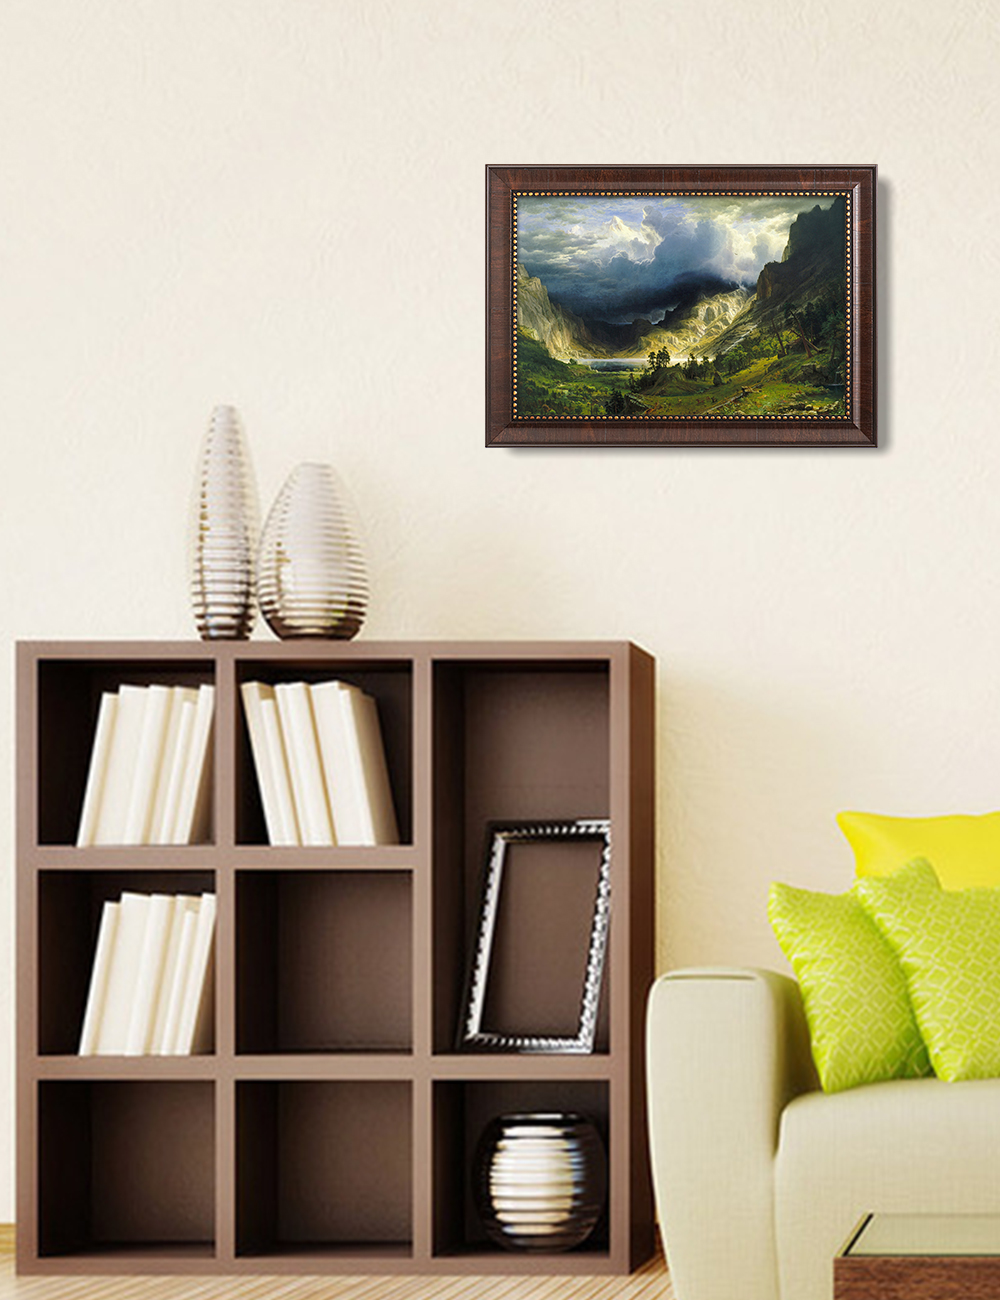 DECORARTS A Storm in the Rocky Mountains by Albert Bierstadt. Classic Art  Reproduction, Giclee Print on Canvas. Ready to Hang Framed Wall Art for Wall  Decor. Total Size w/ Frame: 21x15